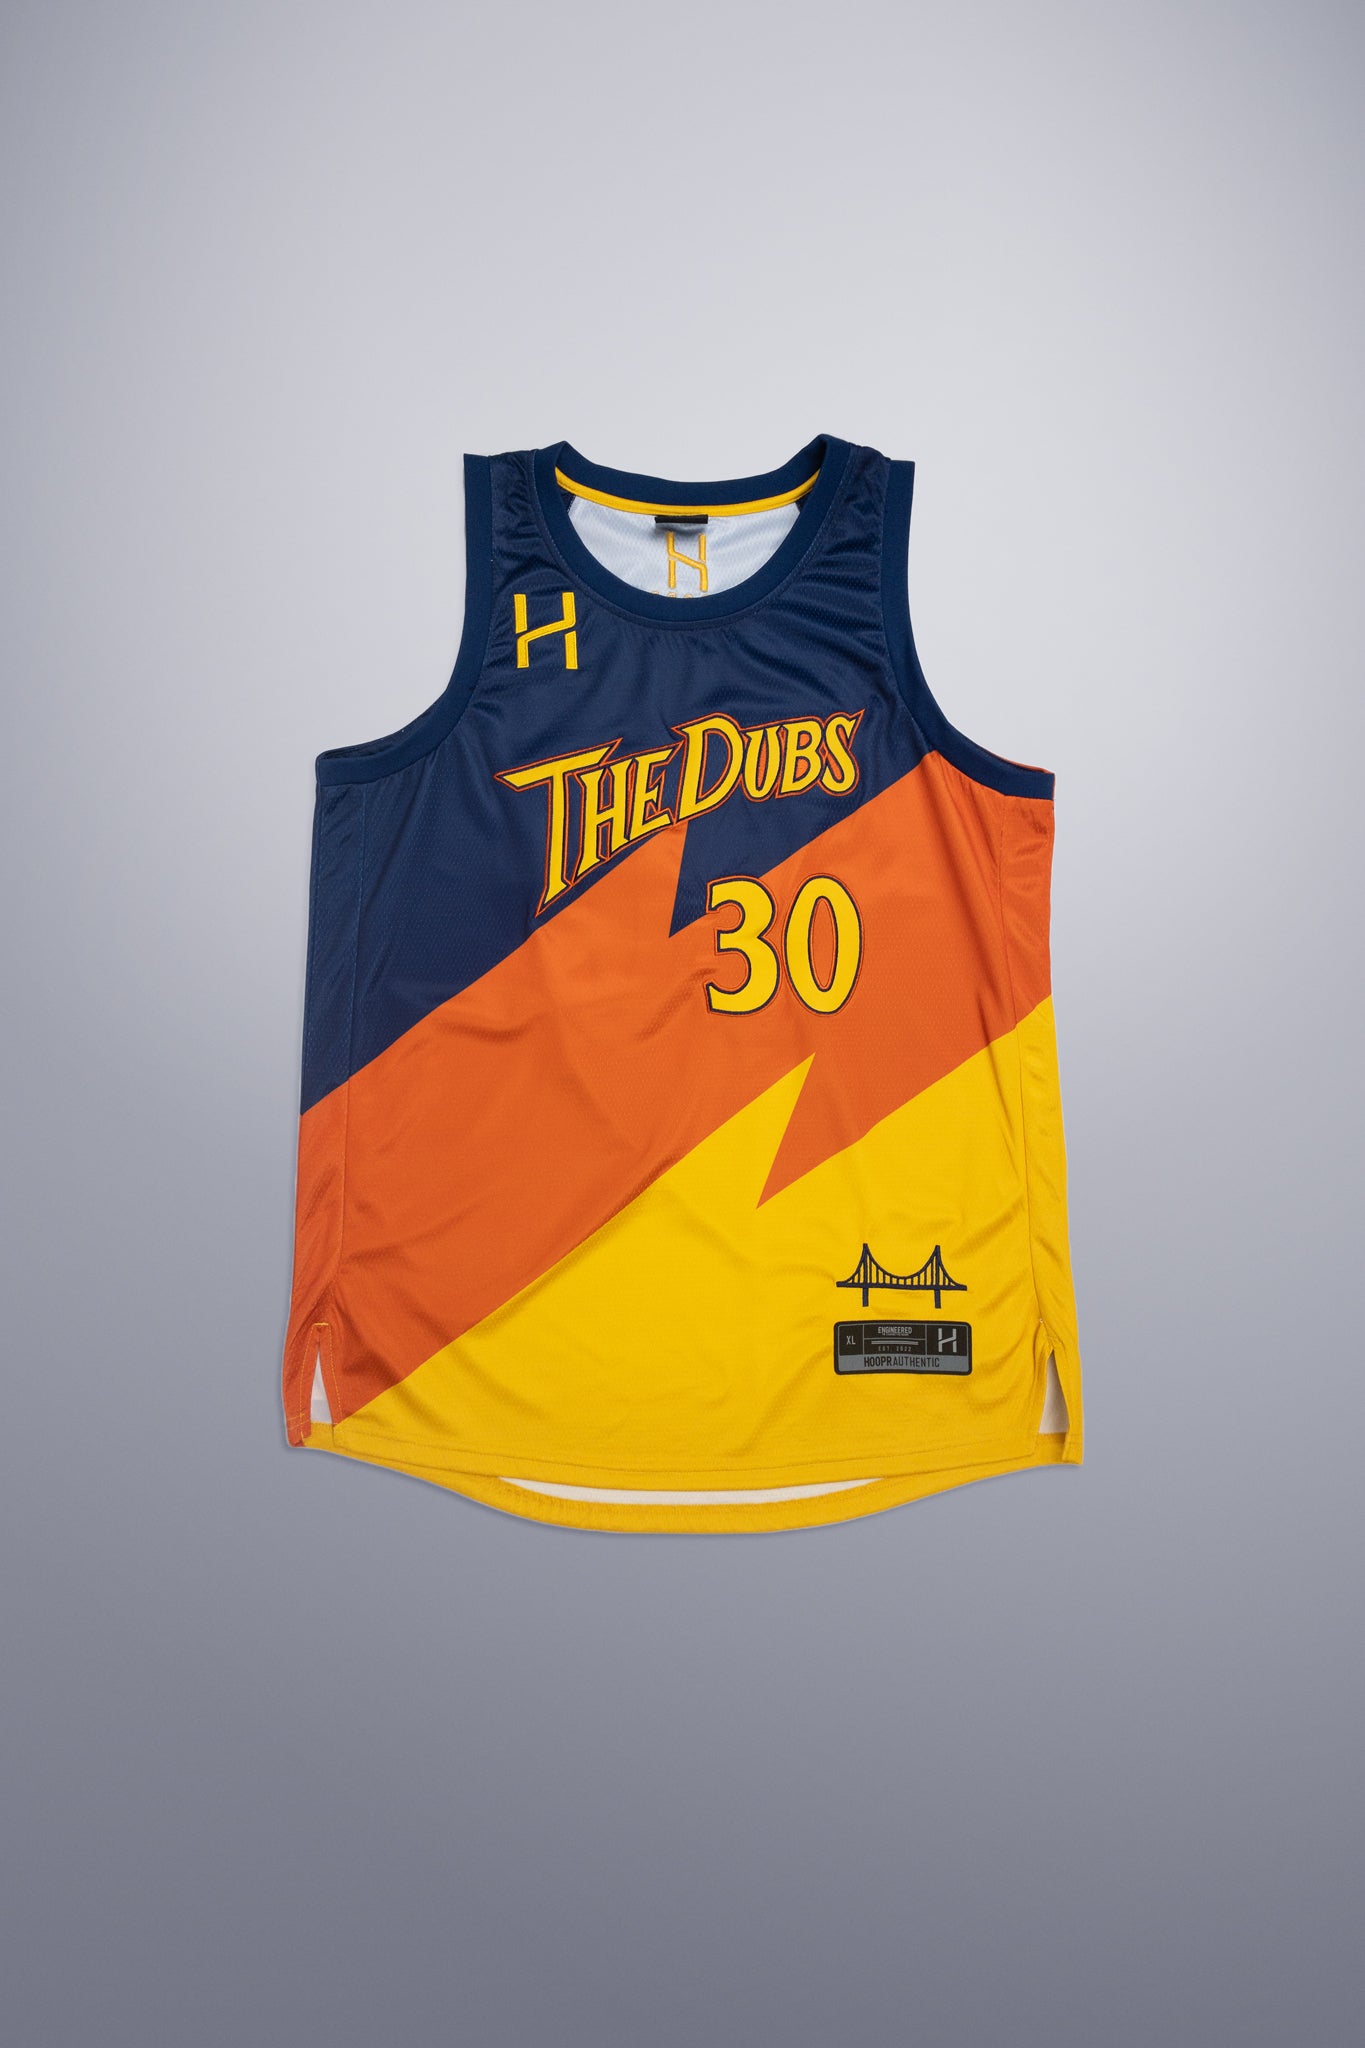 The Dubs Jersey